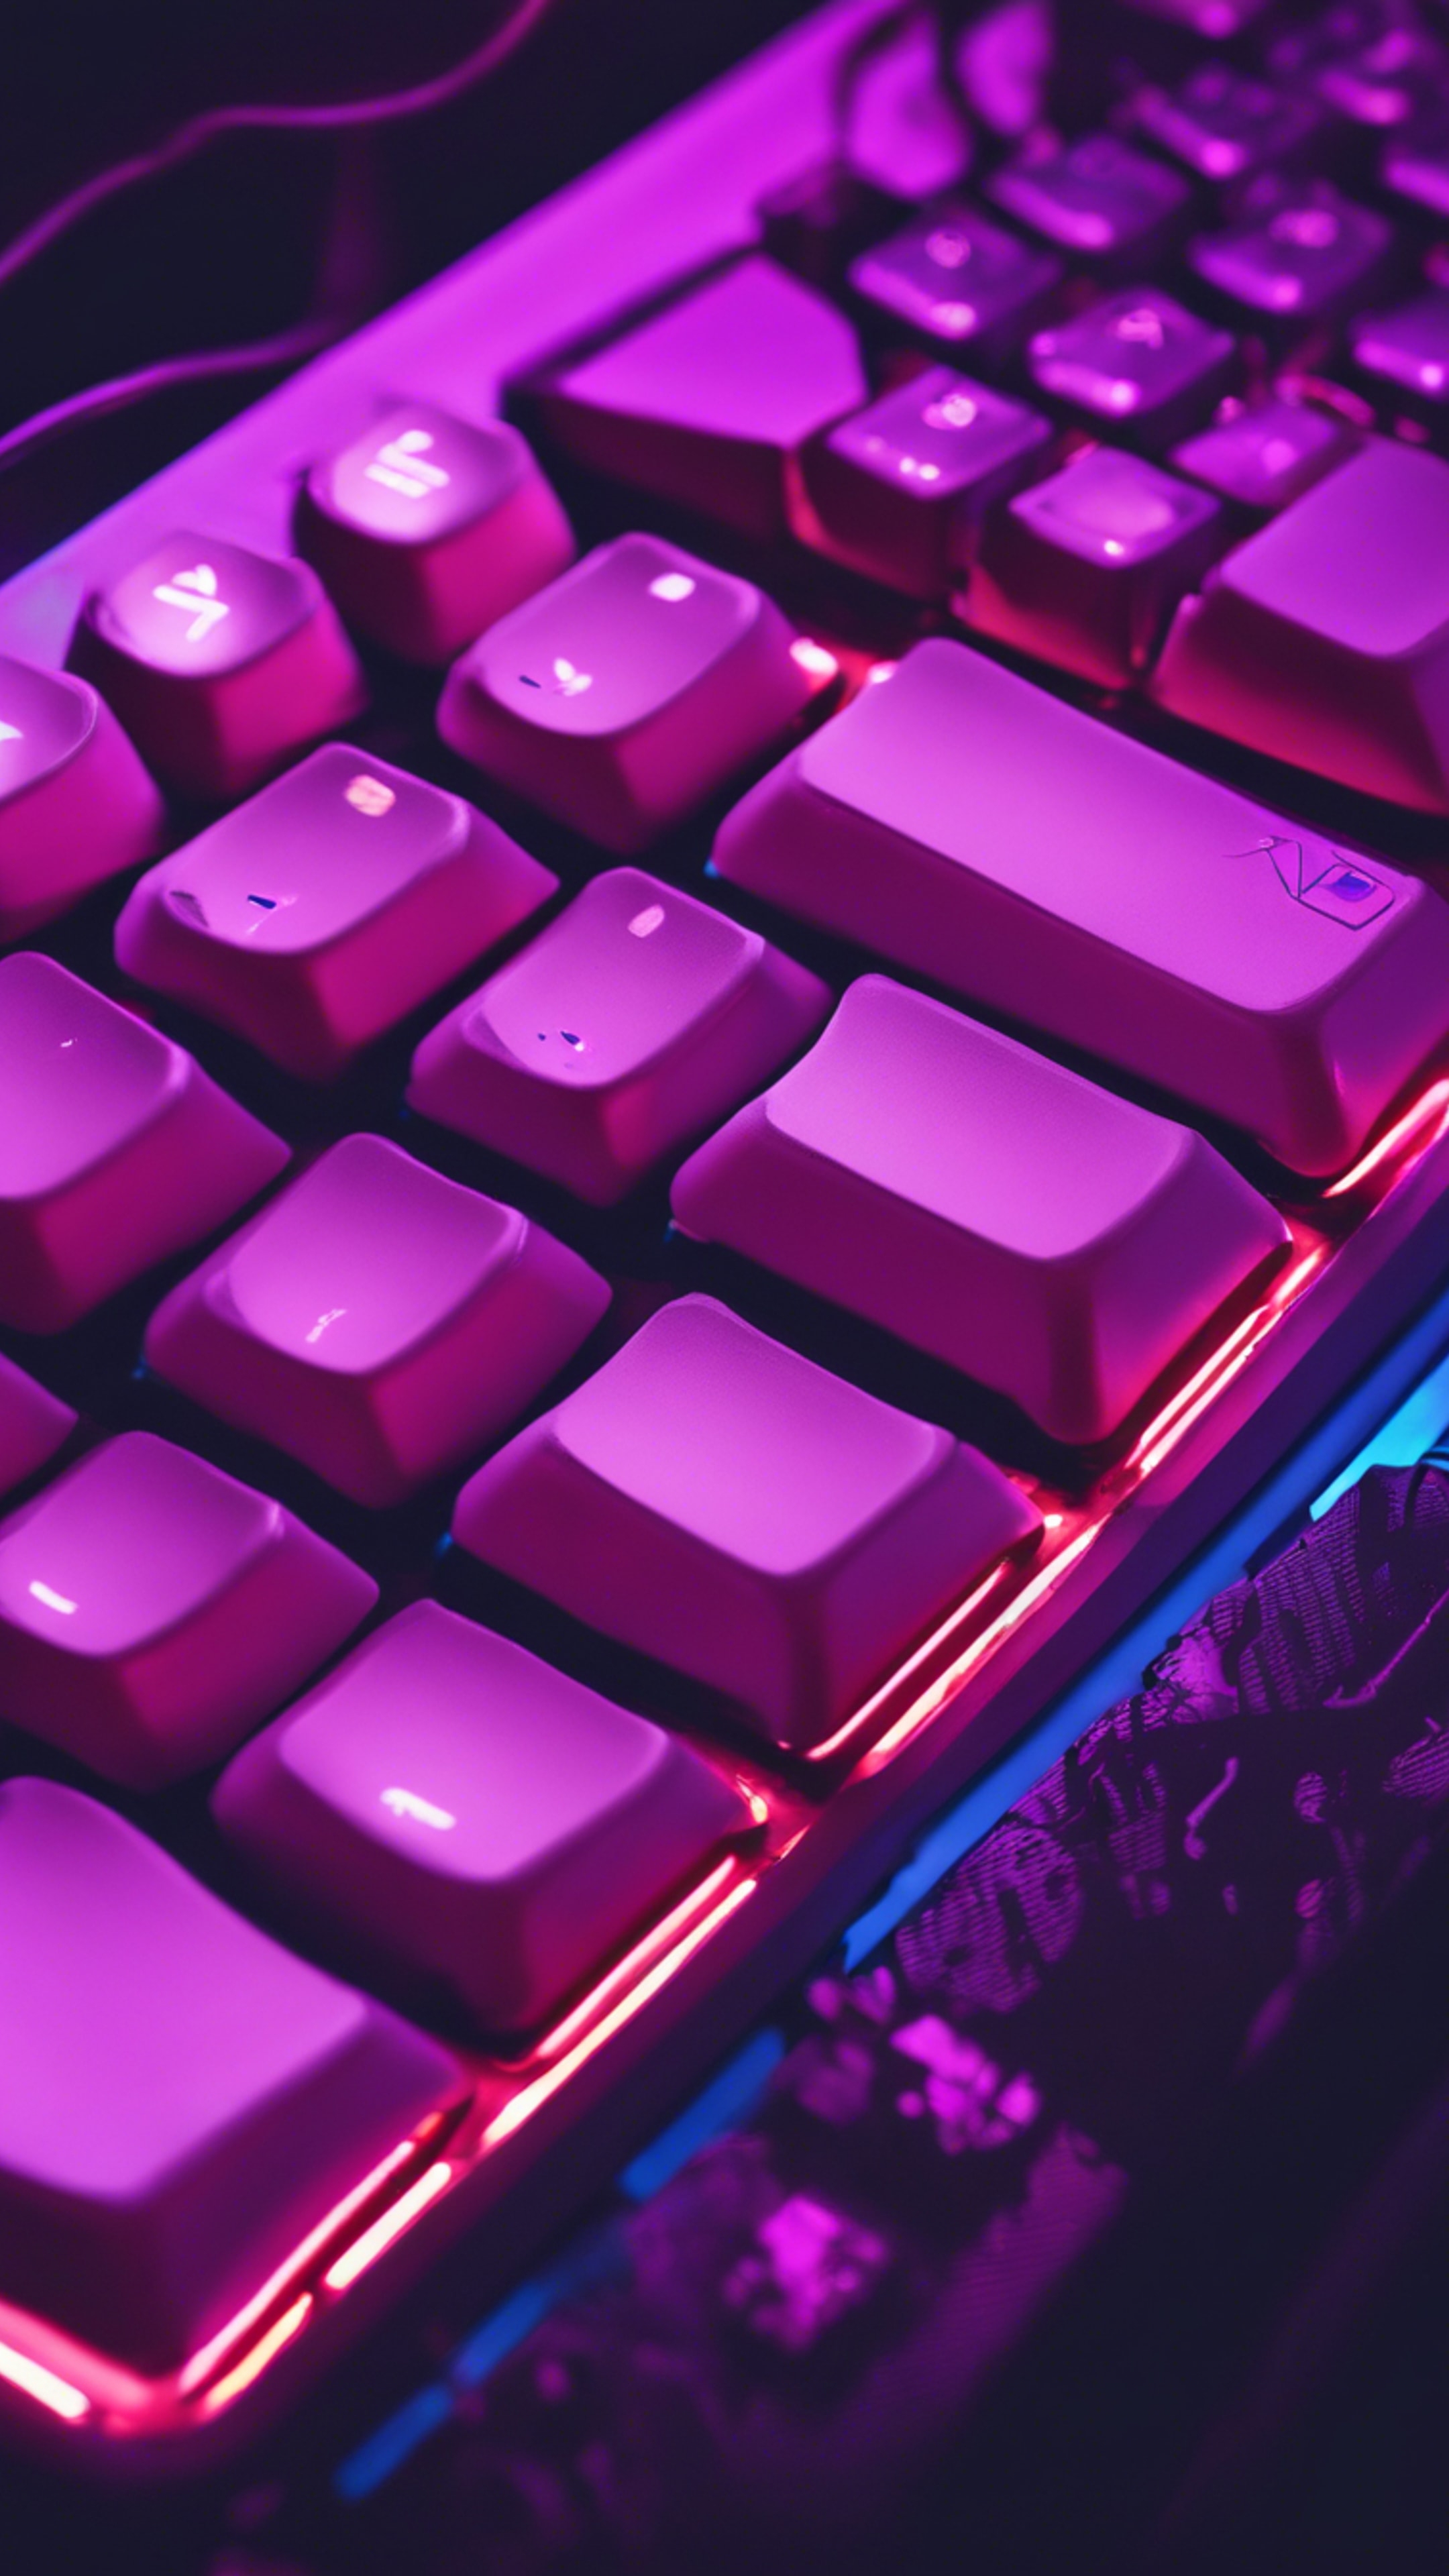 A detailed close-up image of a neon purple backlit gaming keyboard in a dark room. Hình nền[fb3f2373aec546b8b630]